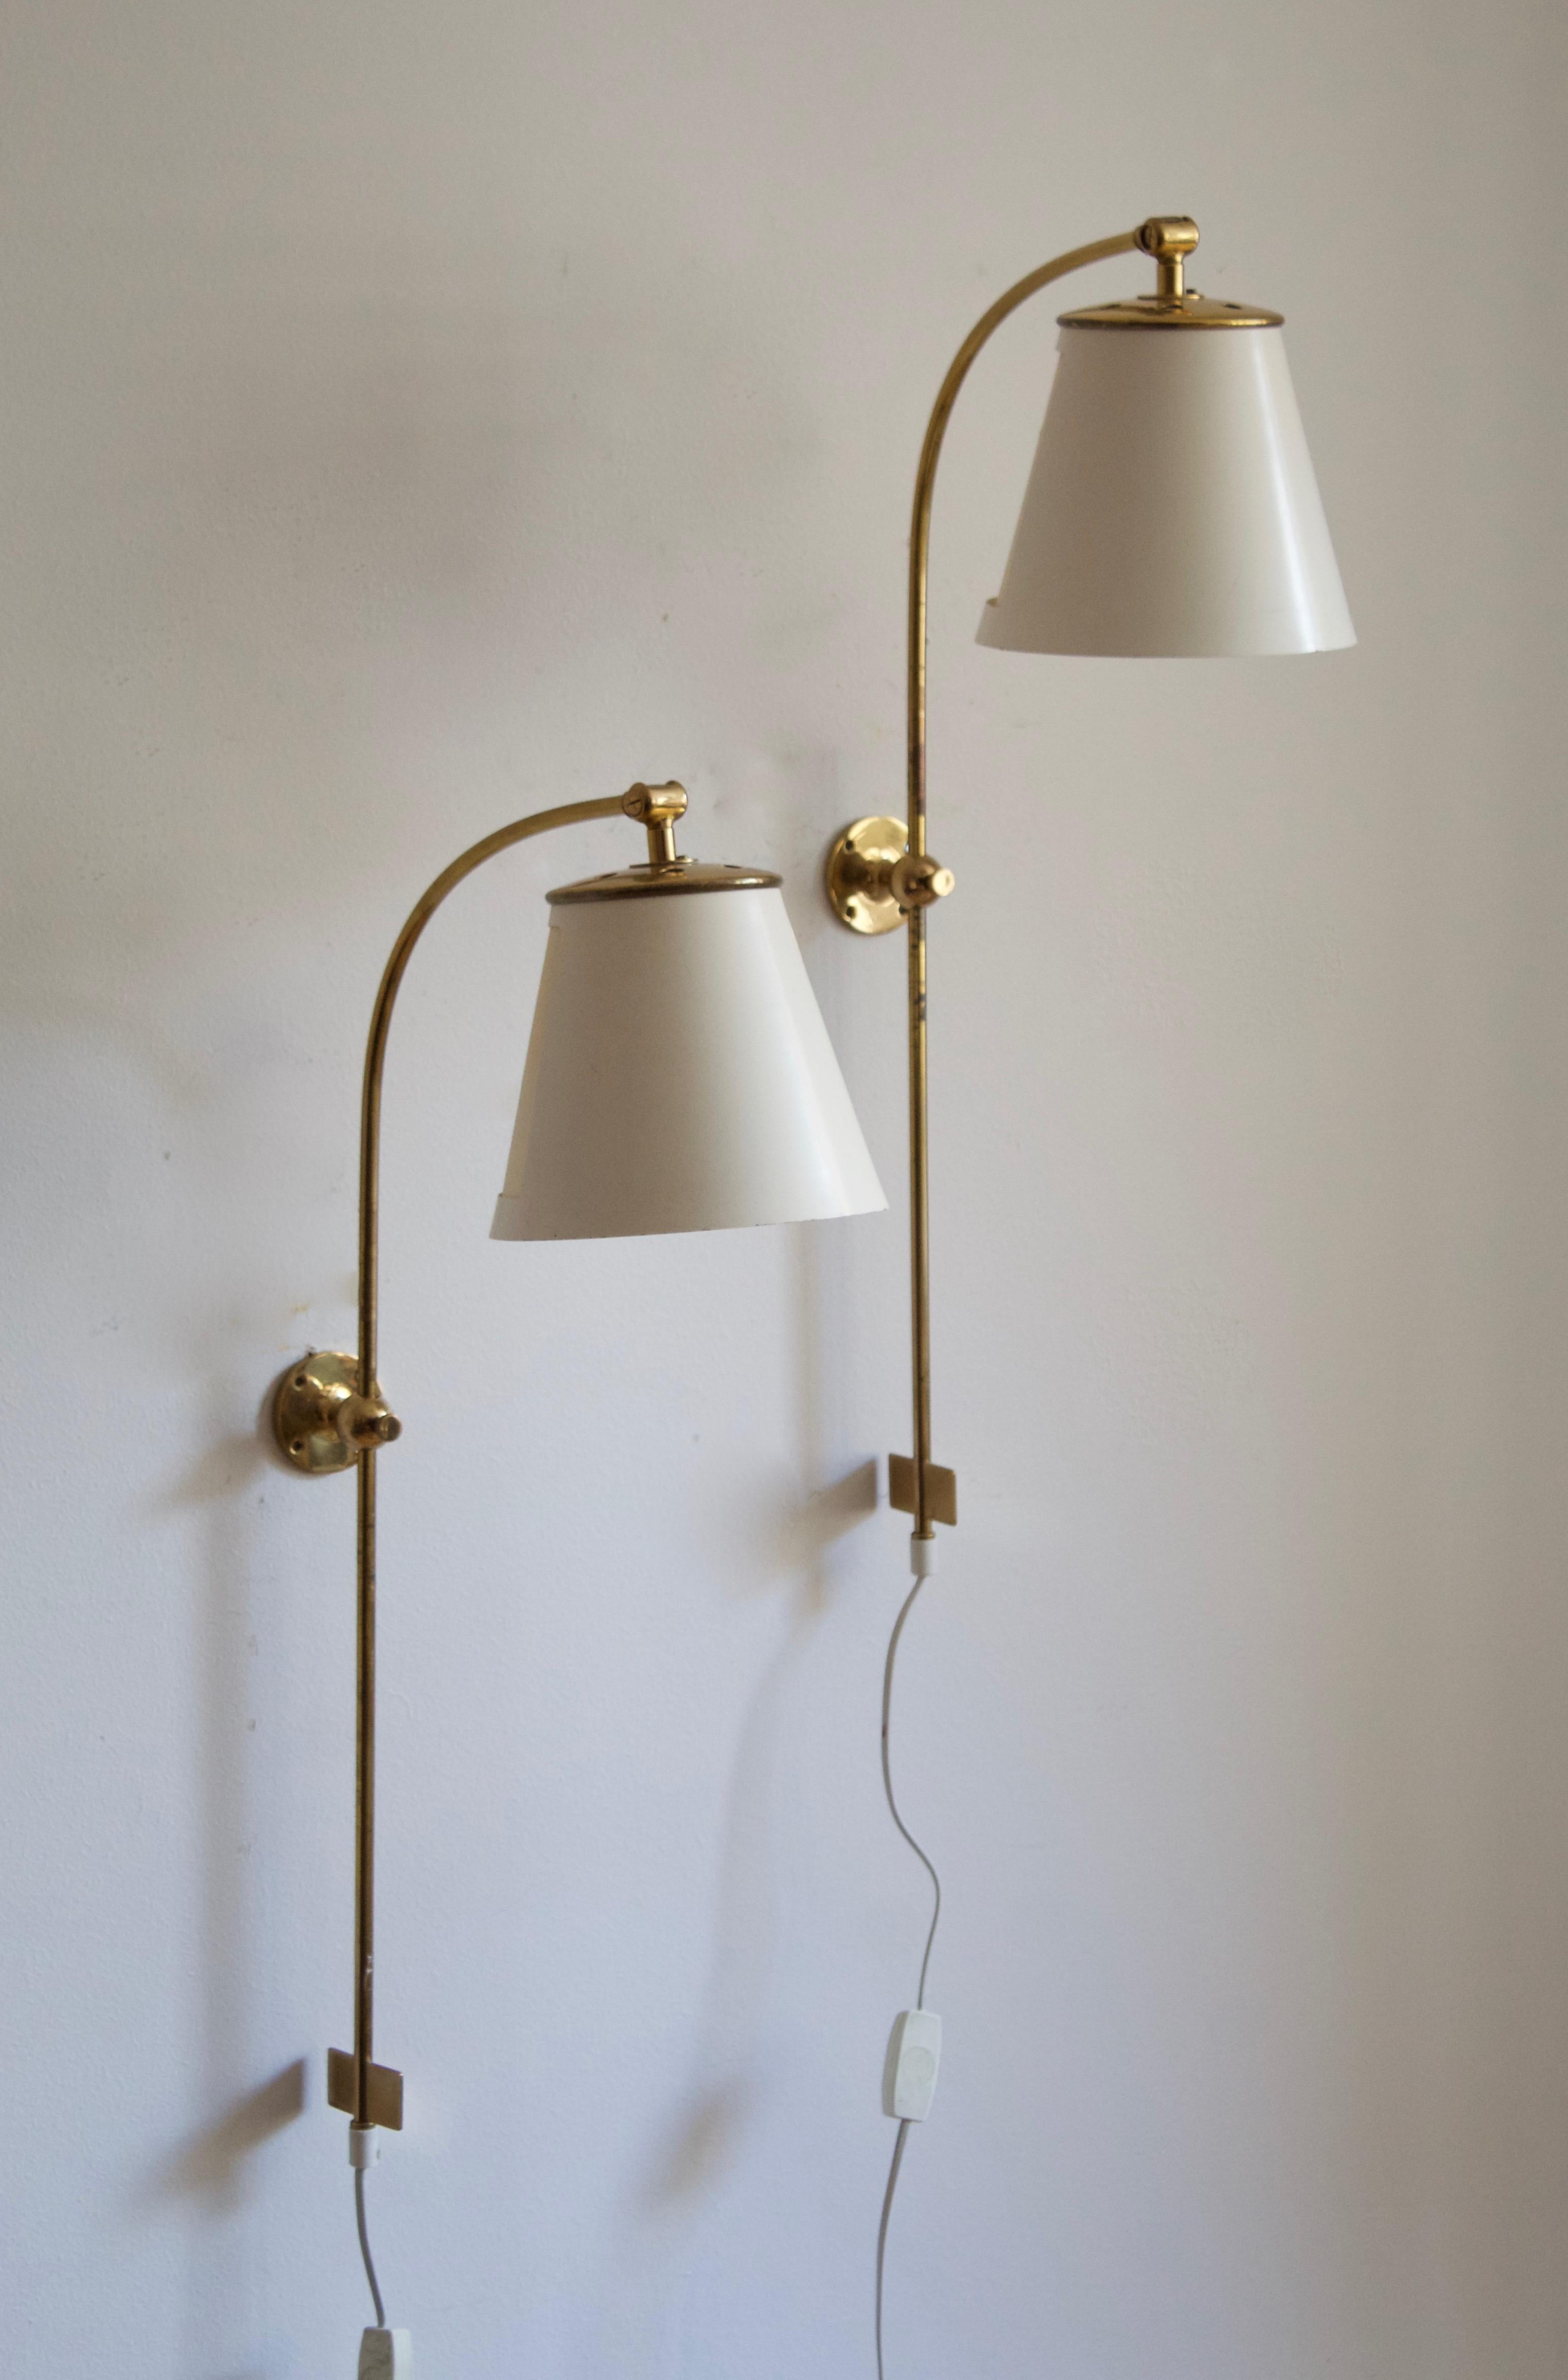 A pair of adjustable wall lights / sconces. Designed by Josef Frank, produced by Svenskt Tenn, Stockholm, Sweden, c. 1950s. Original lacquered metal / paper lampshades

Stated dimensions include lampshades as is illustrated.

Other designers of